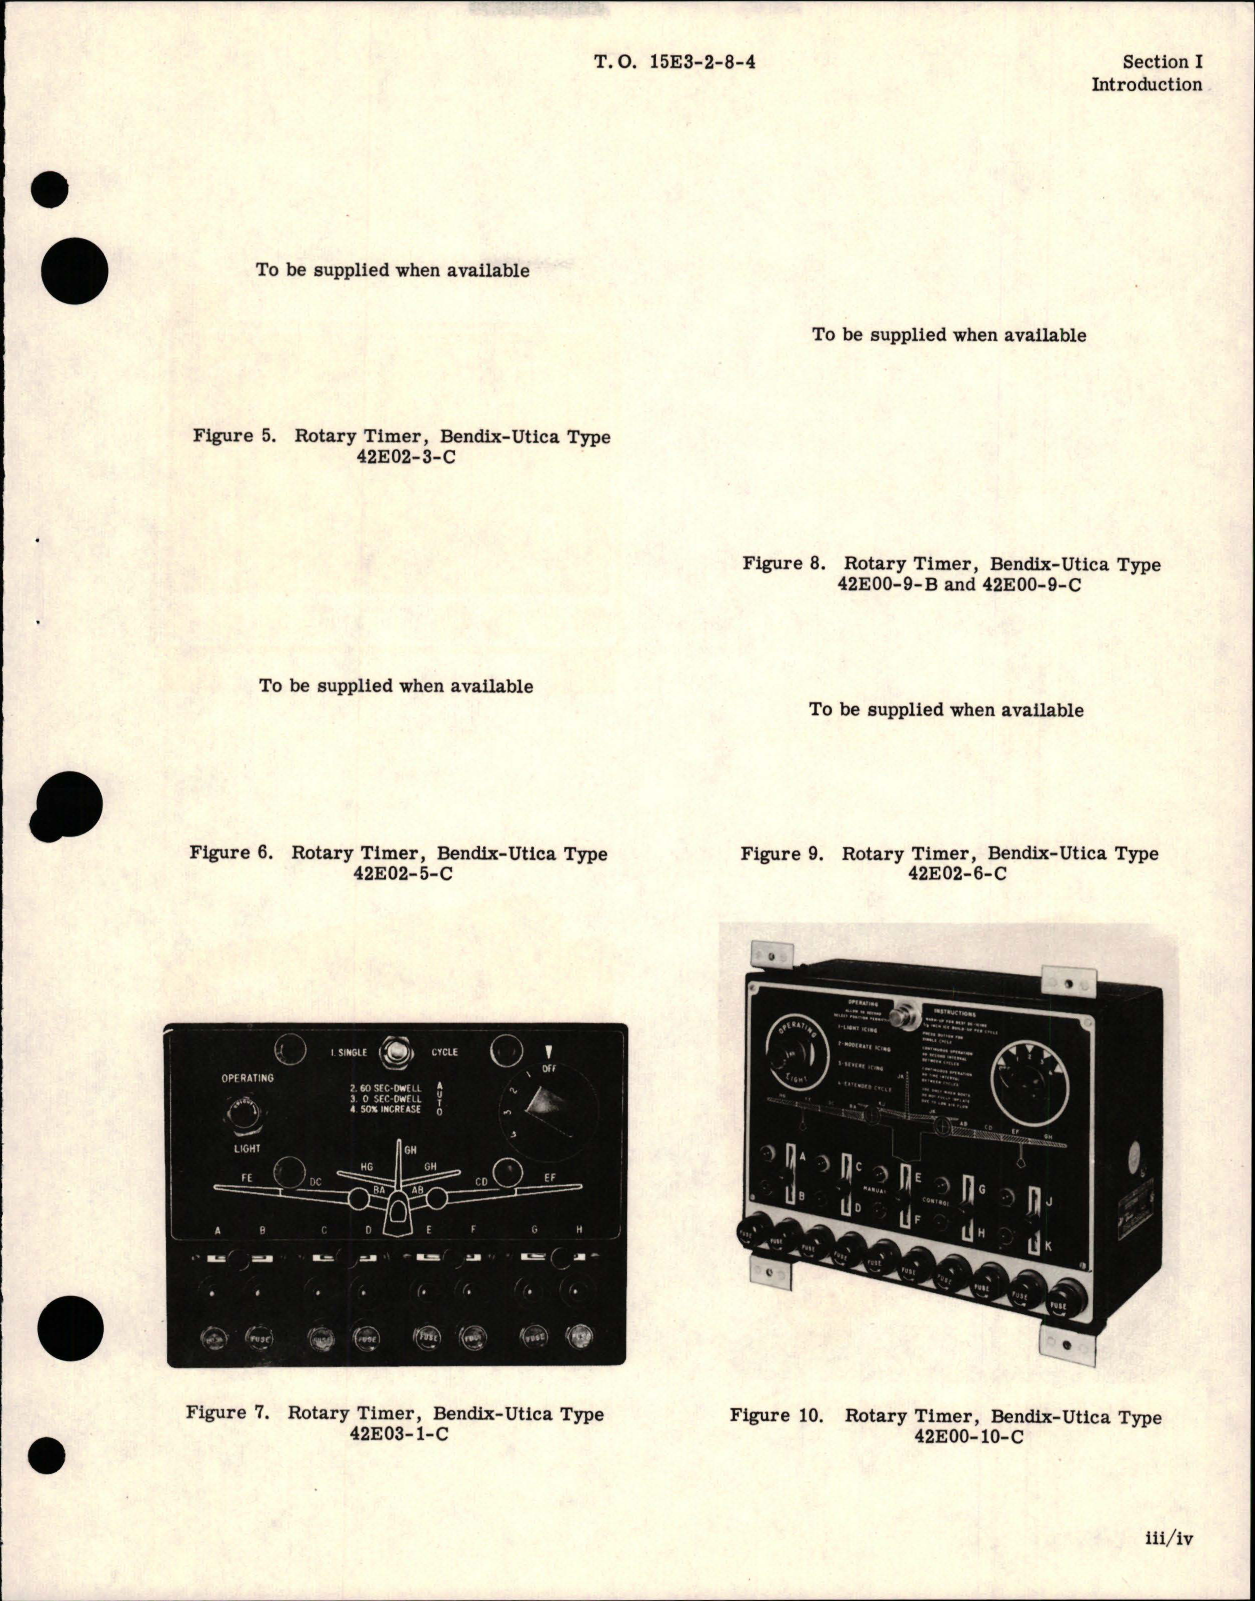 Sample page 5 from AirCorps Library document: Illustrated Parts Breakdown for Rotary Timers 